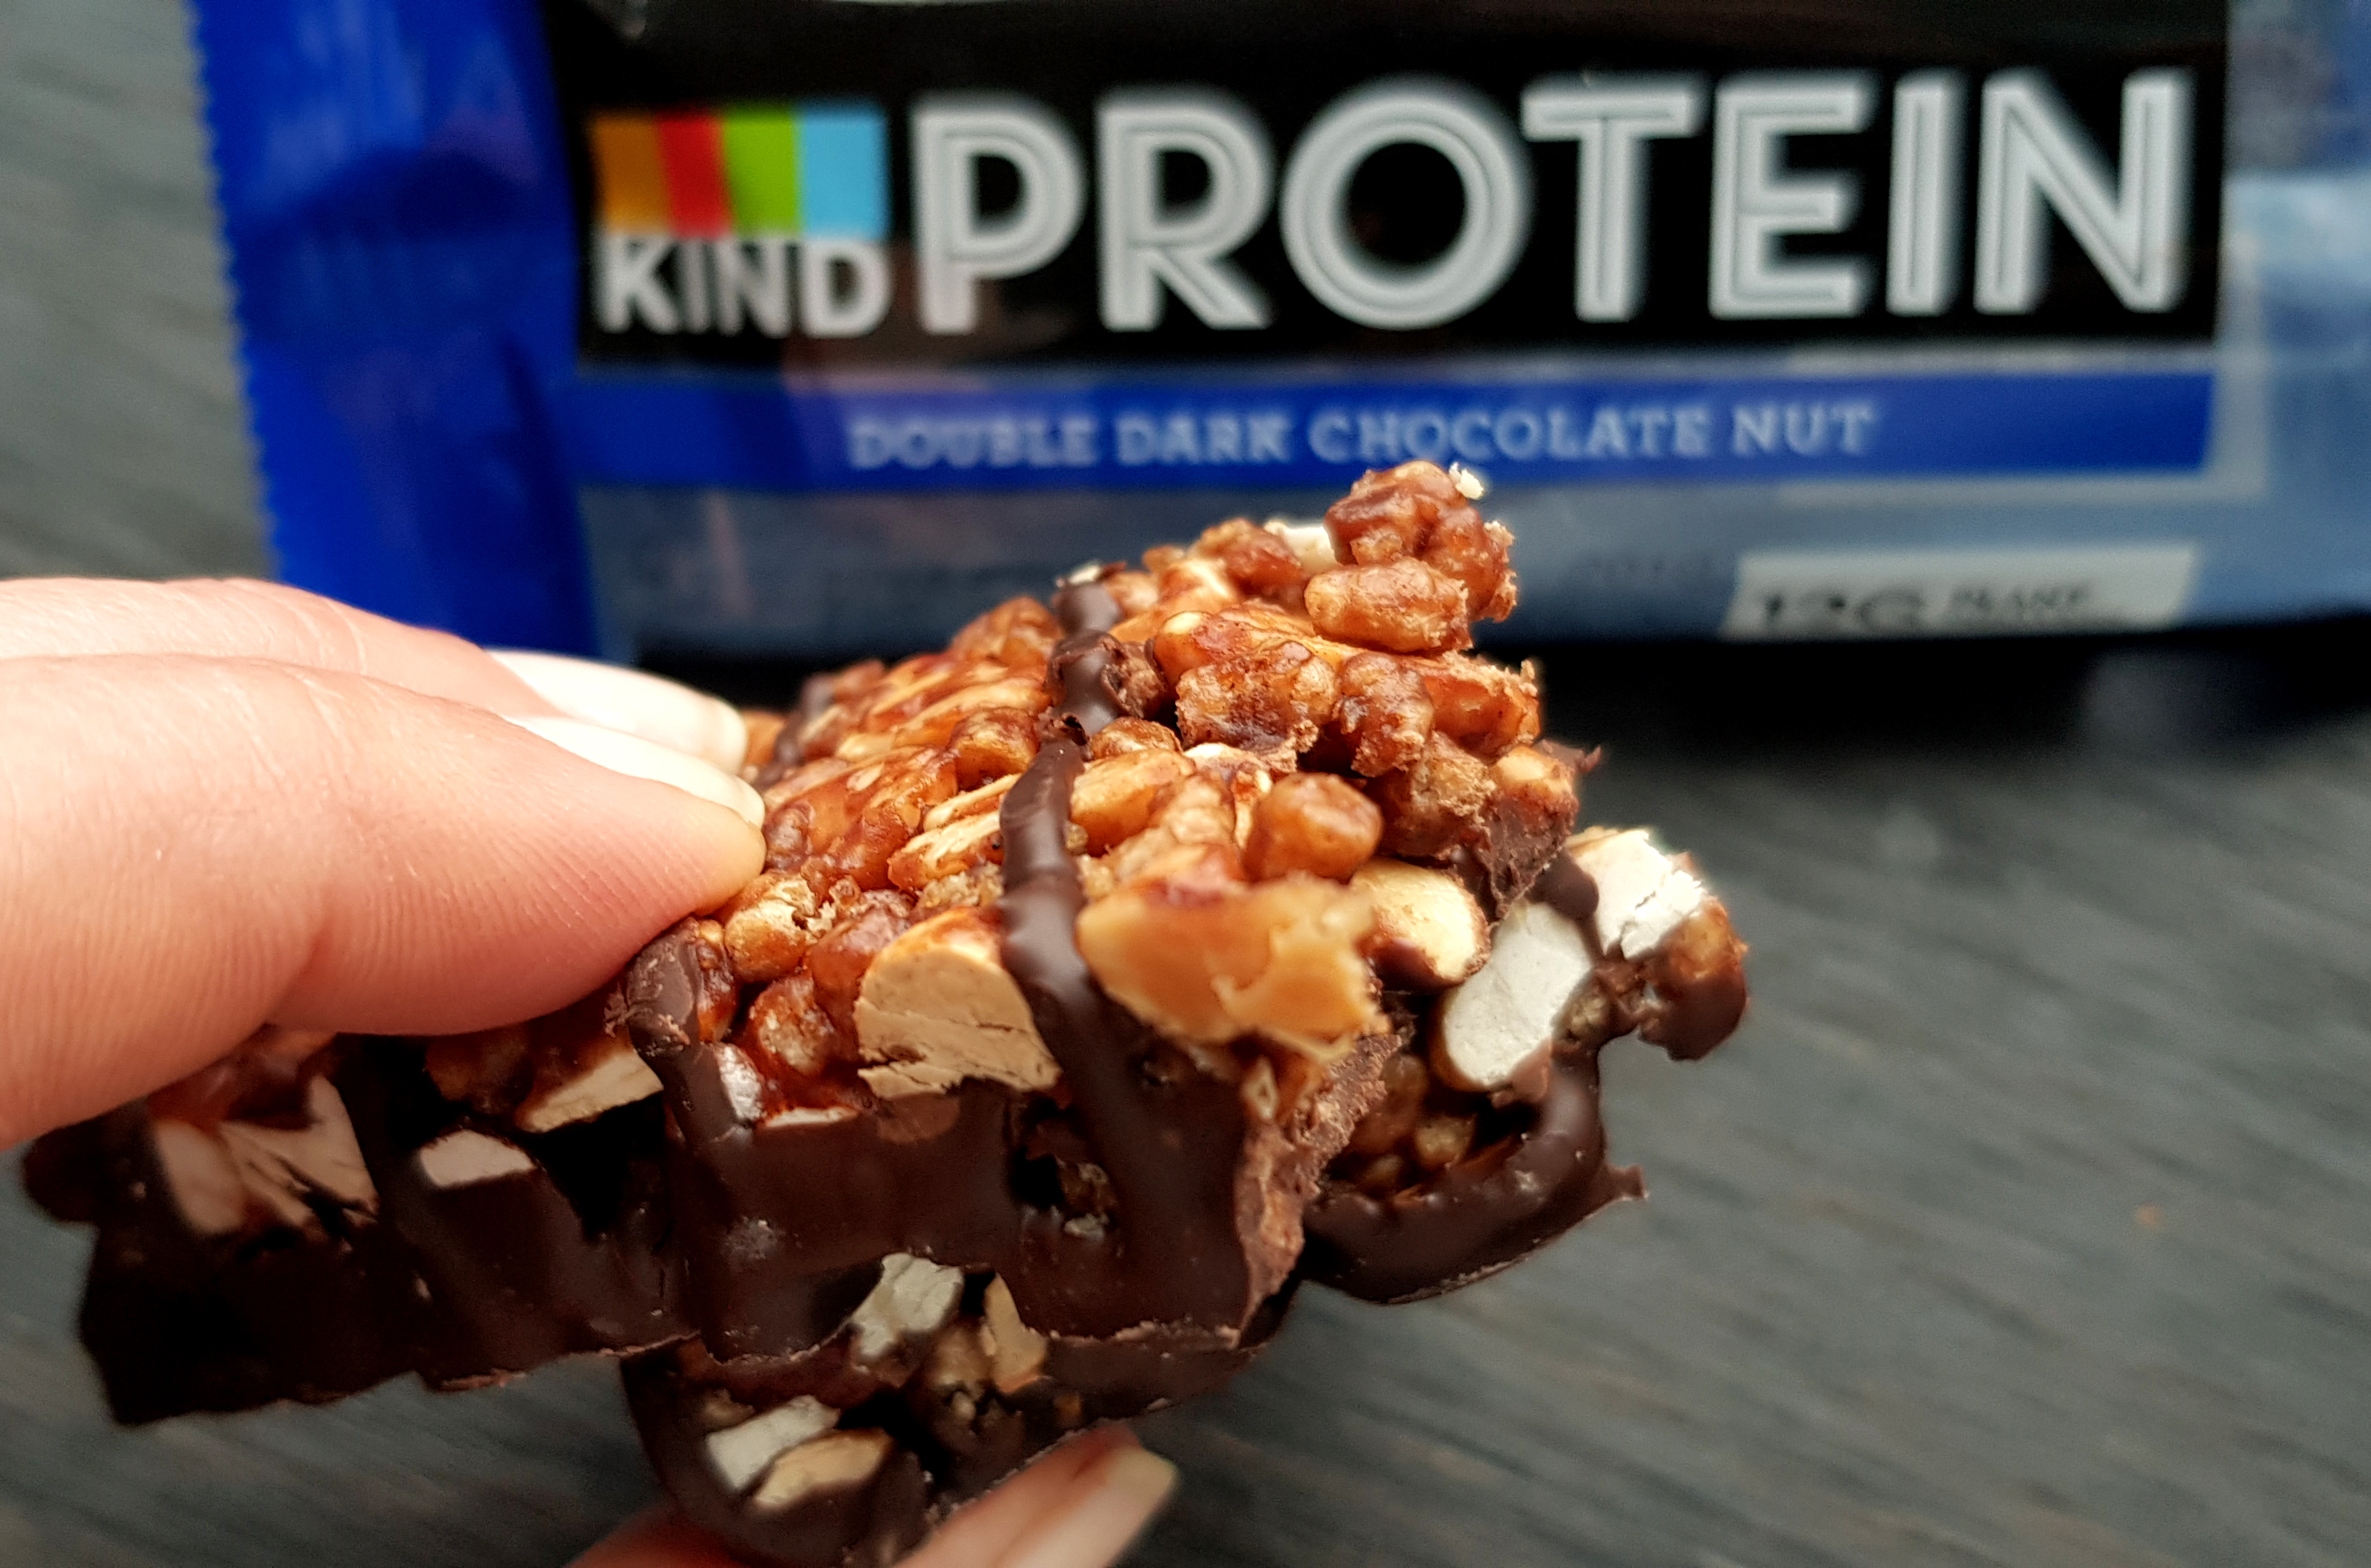 KIND Protein Double Dark Chocolate Nut review